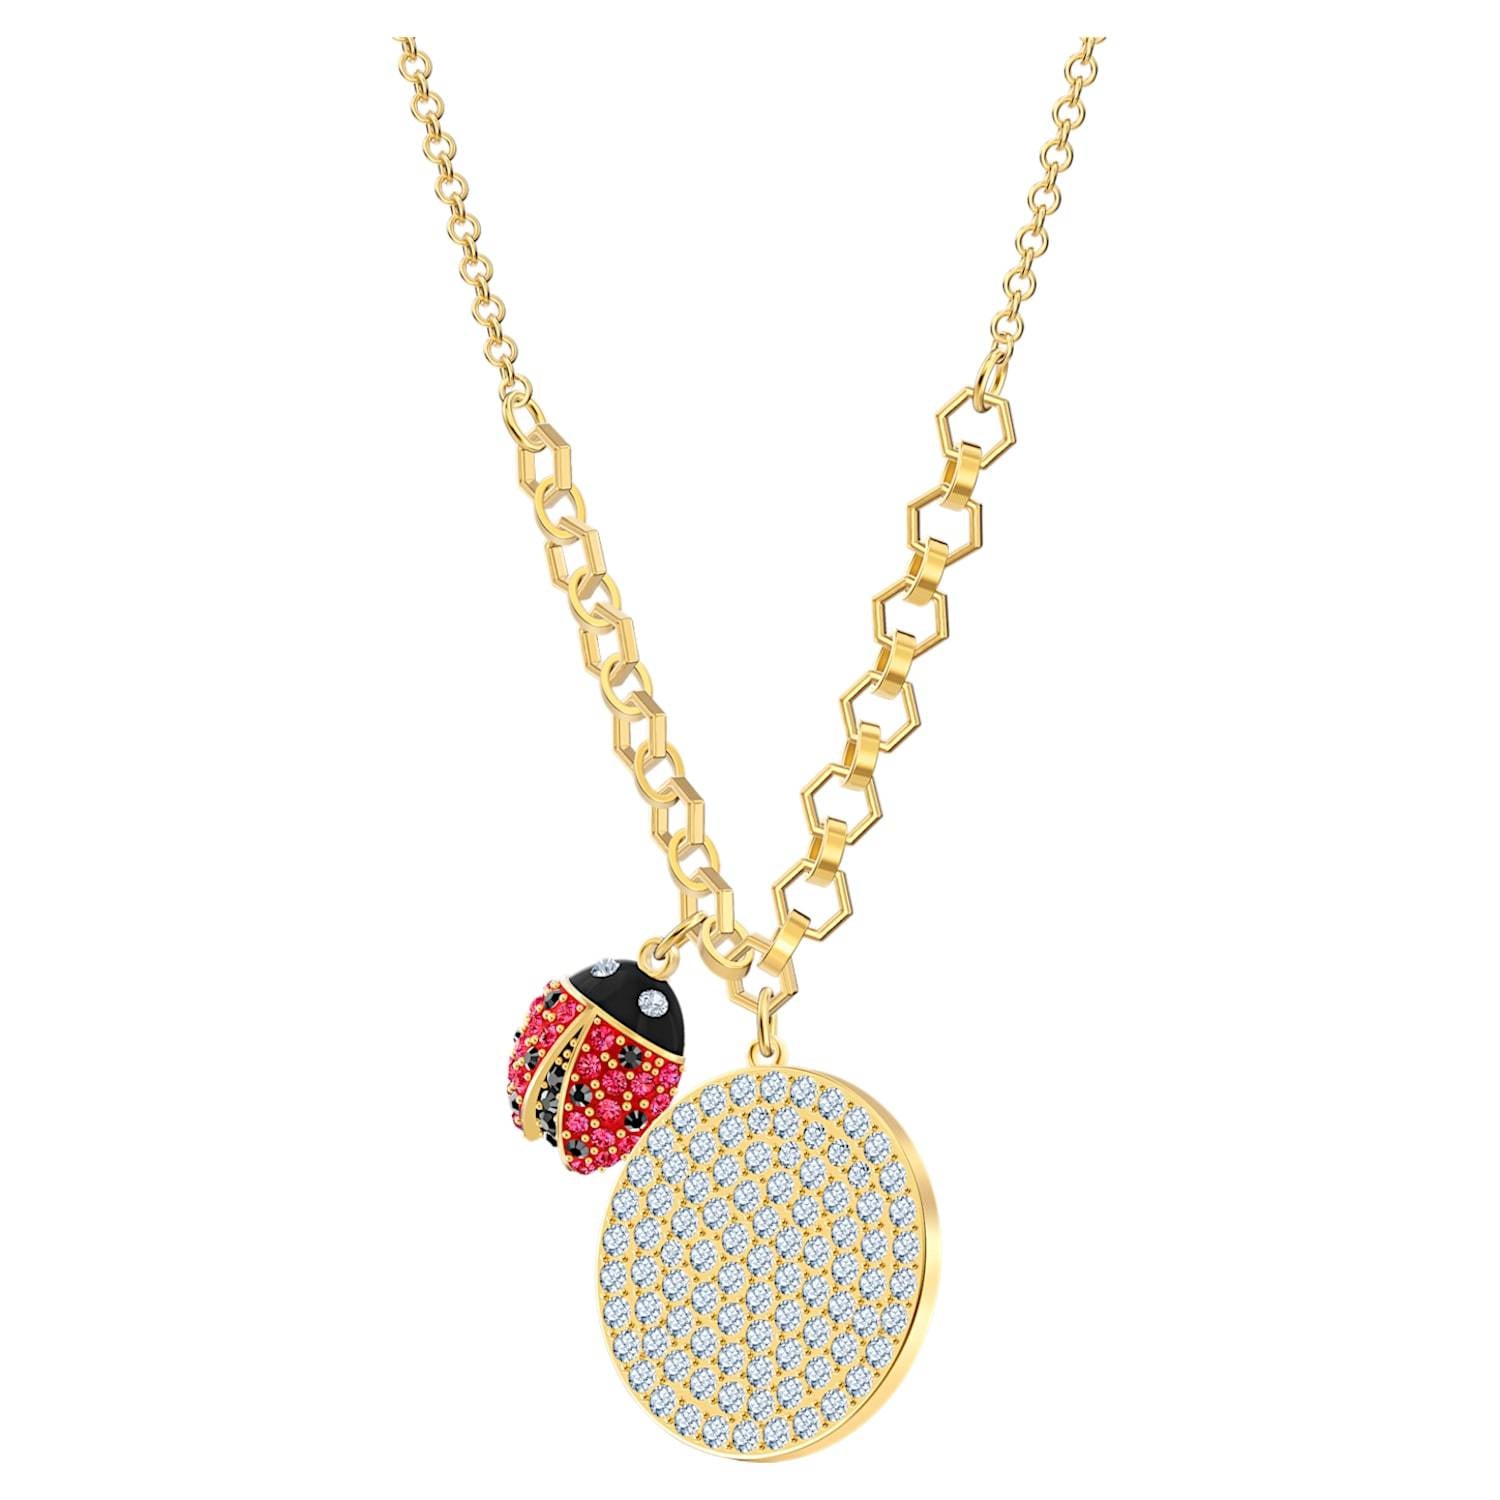 SWAROVSKI Lisabel Coin Necklace - Red & Gold-tone plated #5498808